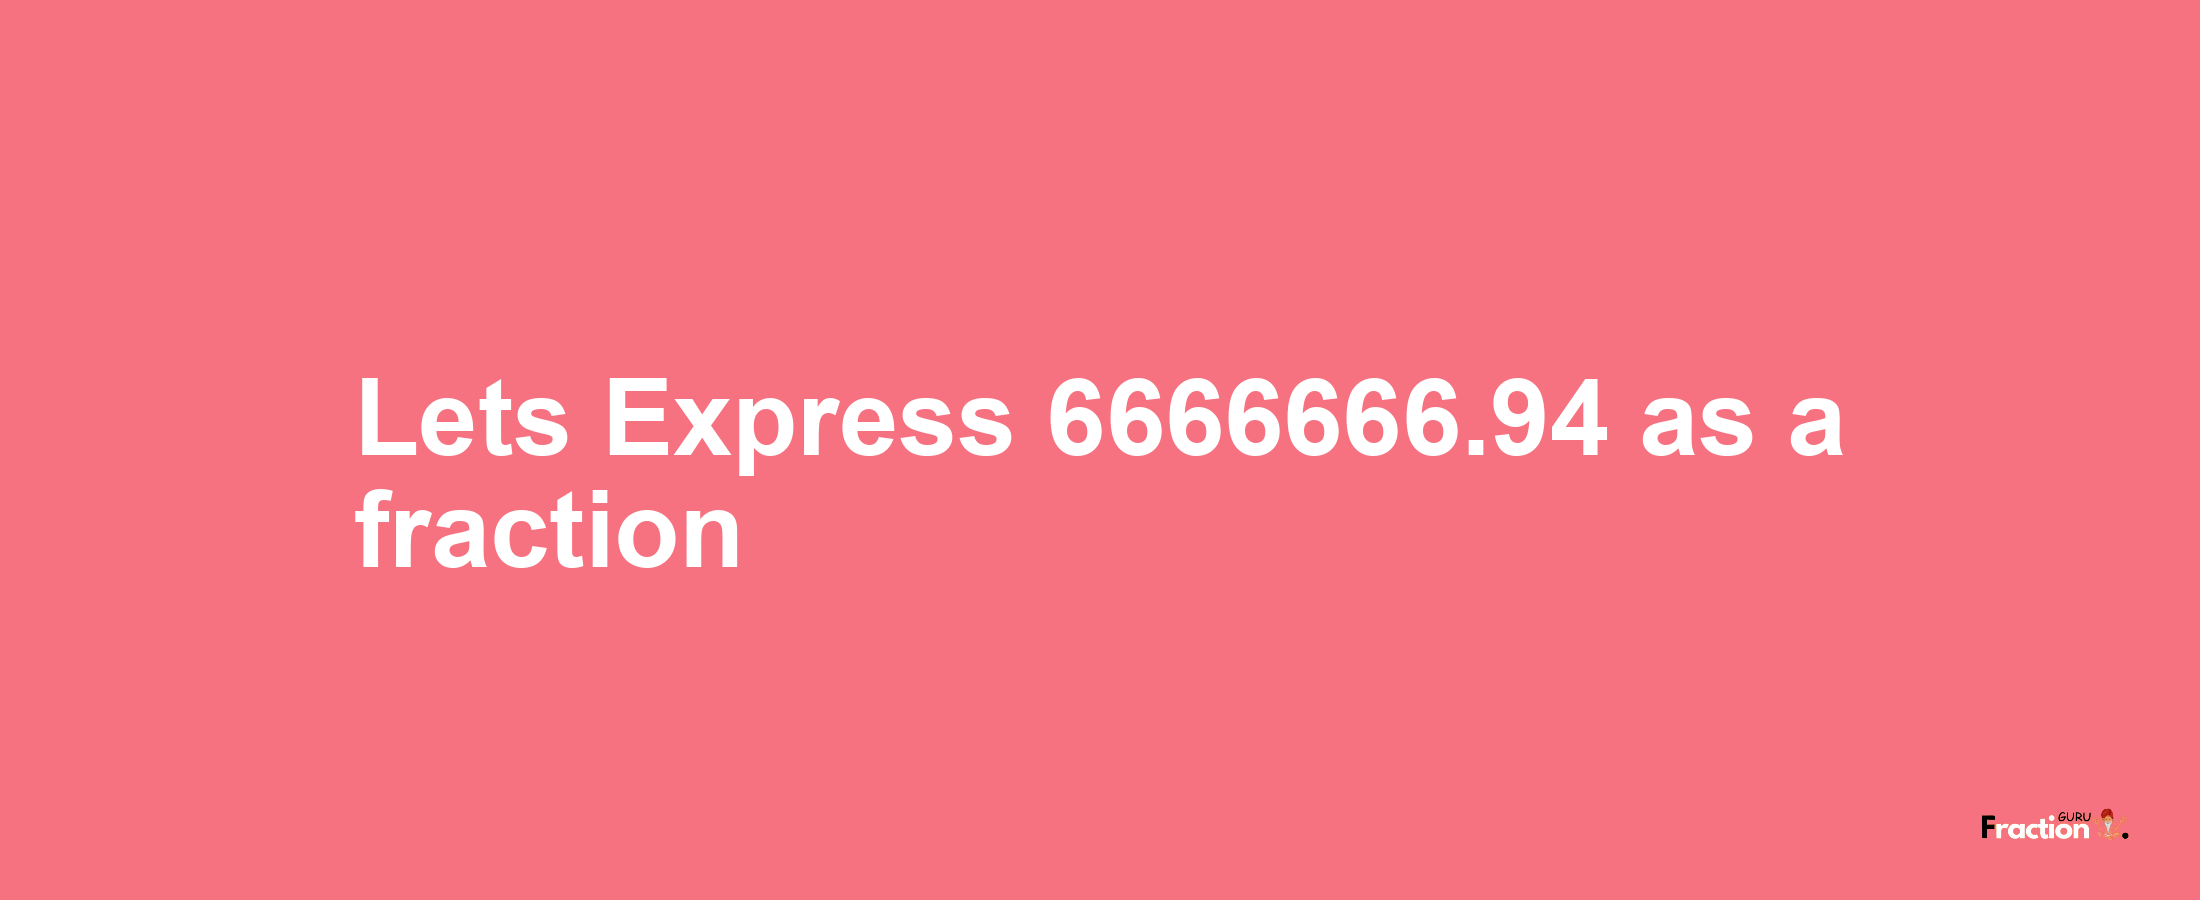 Lets Express 6666666.94 as afraction